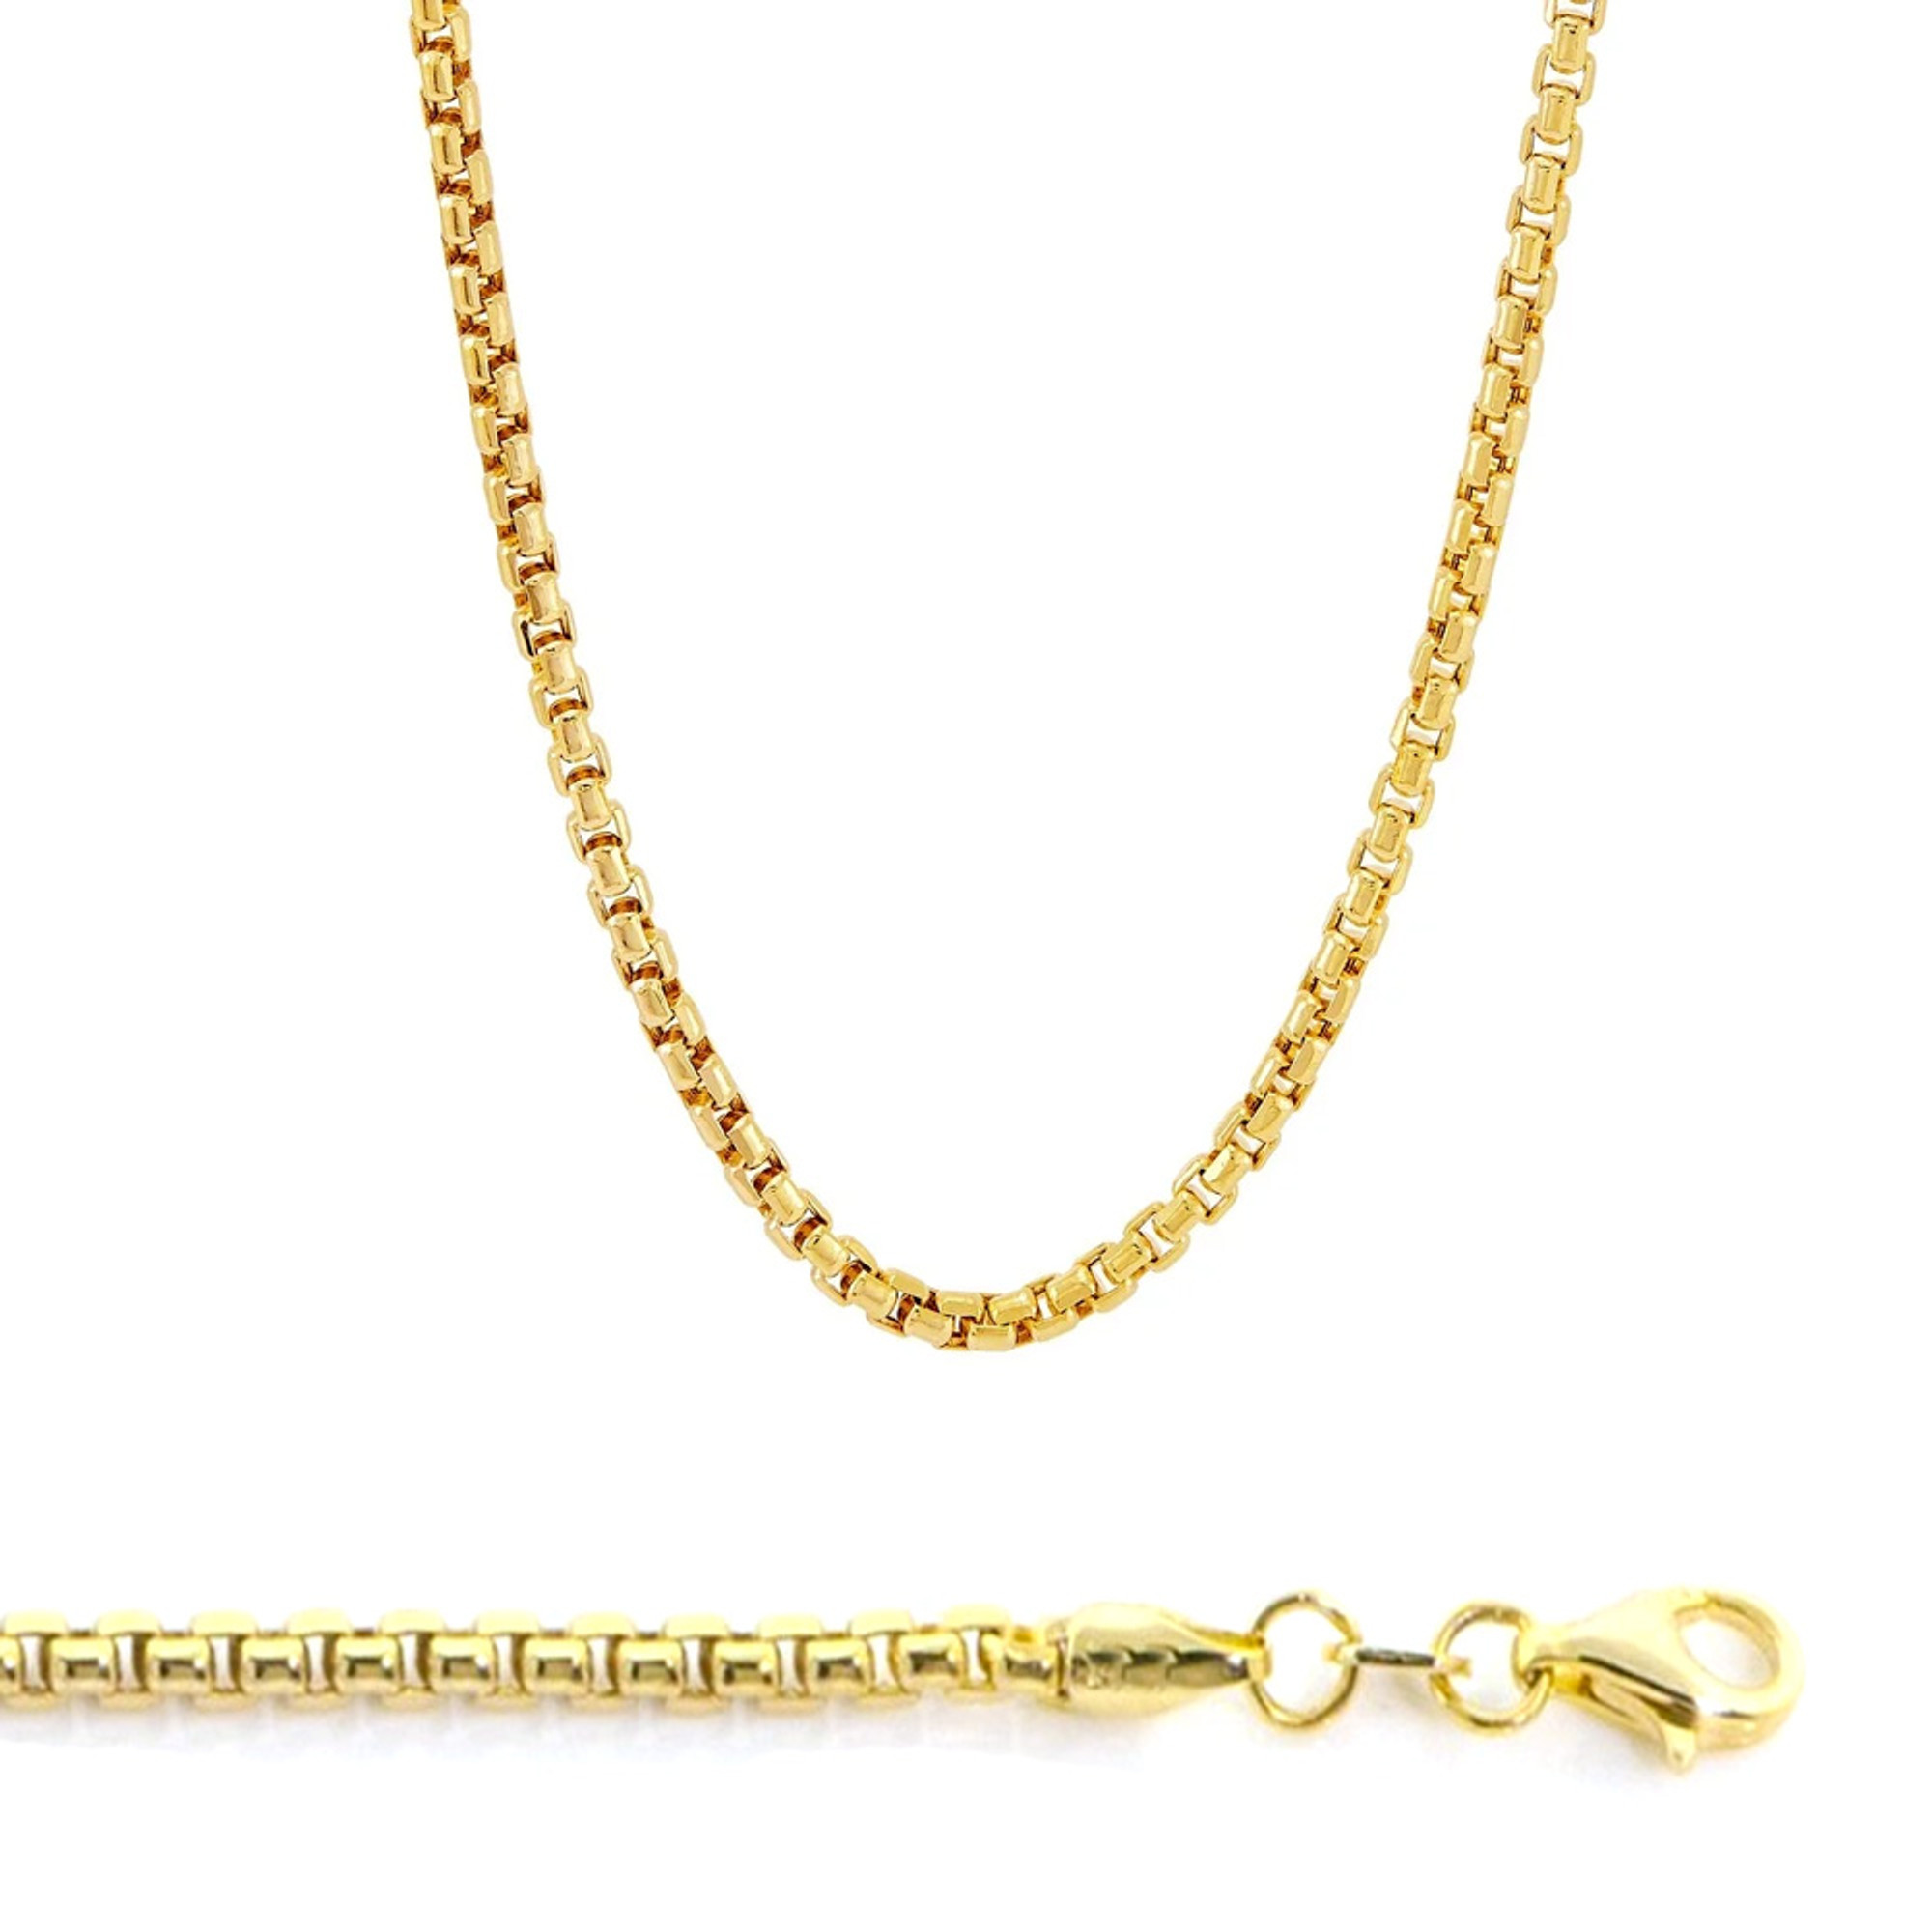 Bead Link Gold Chain by The inch | inch of Gold | Chains by Design 28 Inches